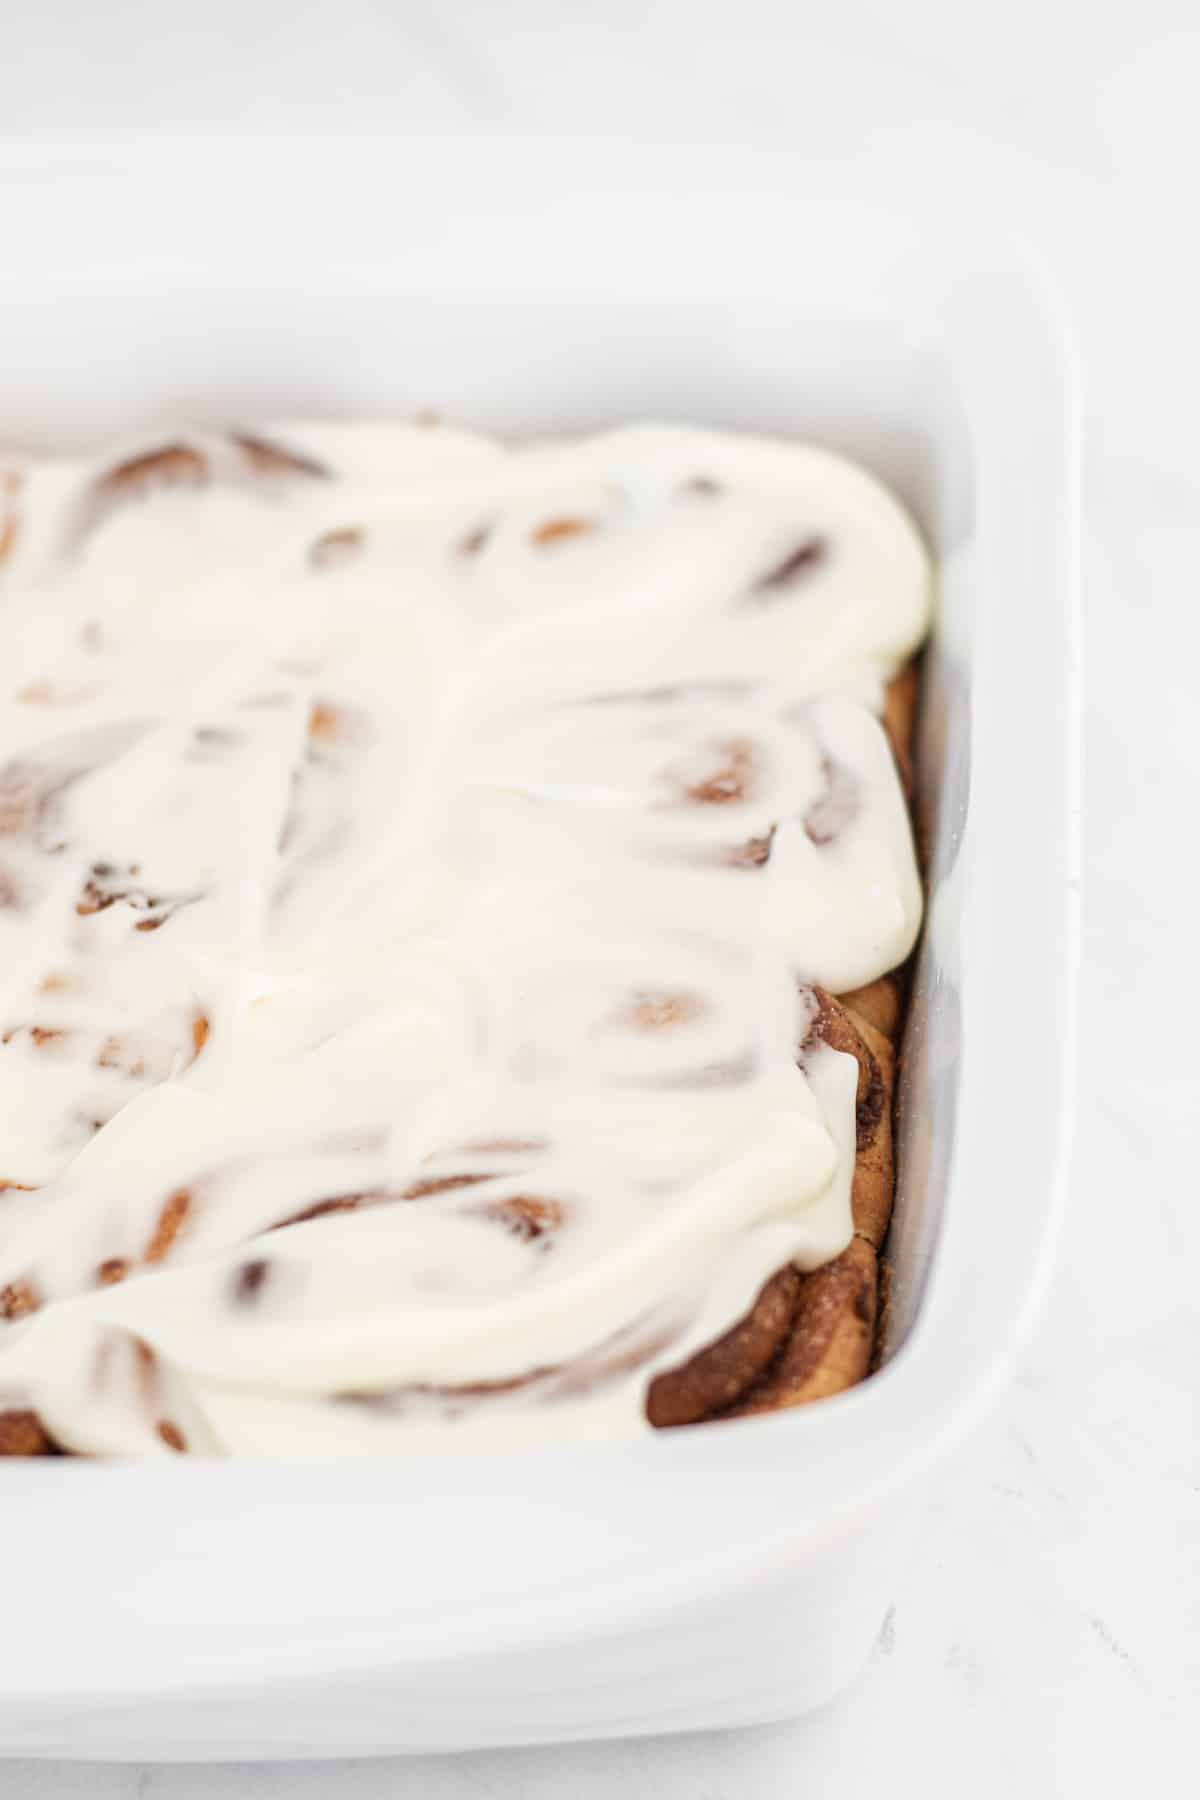 small batch of iced cinnamon rolls in a white tray.